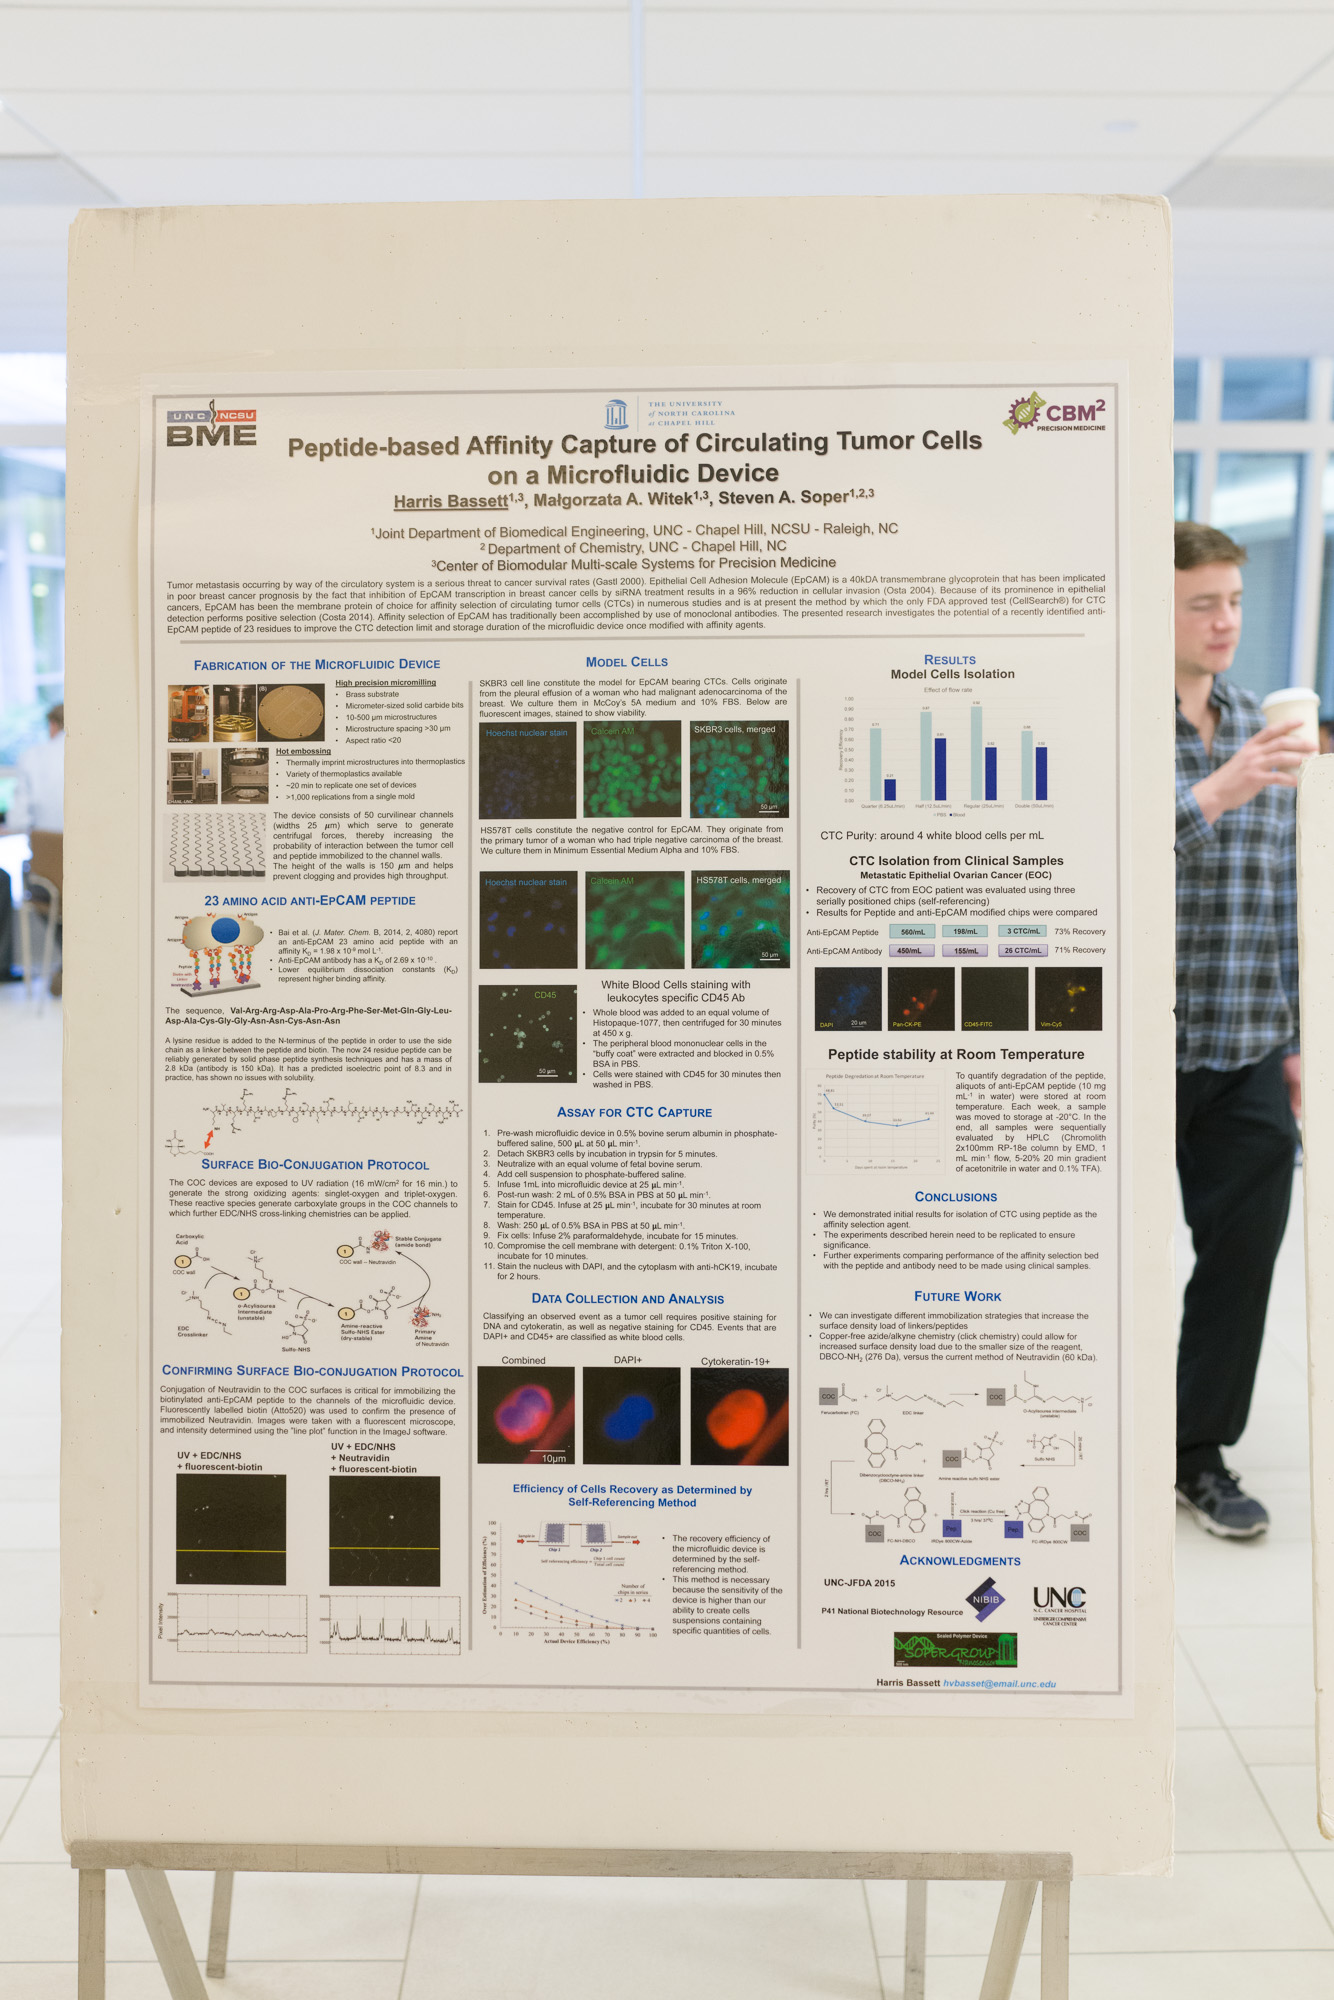 Scientific poster discussing 'Peptide-based Affinity Capture of Circulating Tumor Cells'. A man is partially visible in the background, holding a coffee.